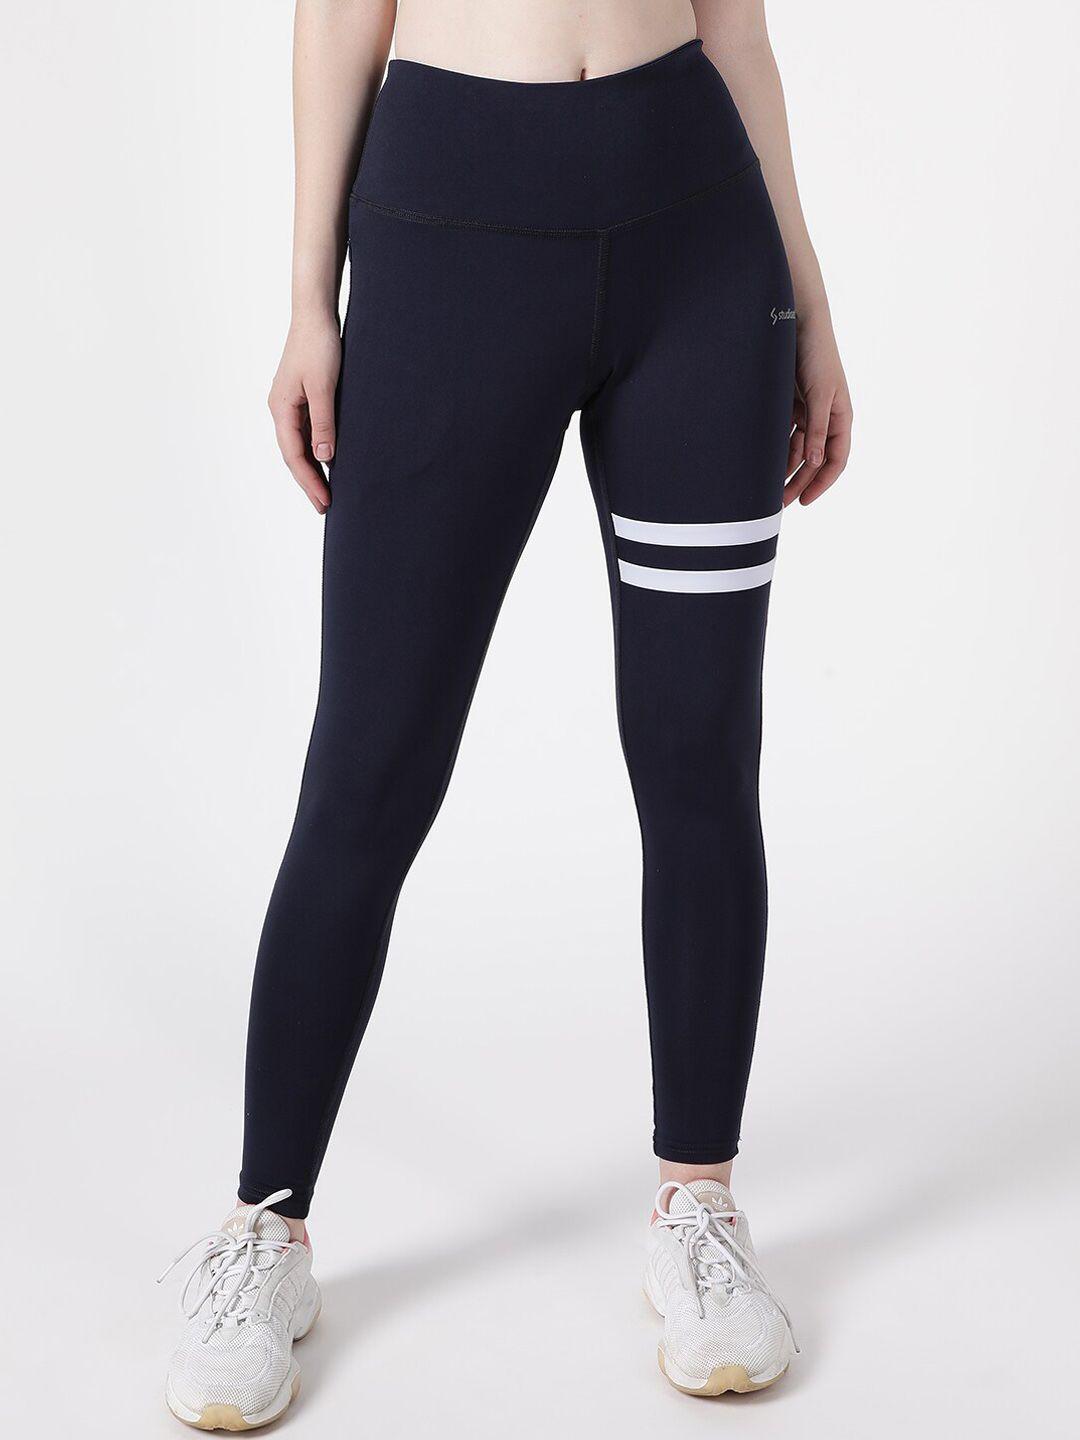 studioactiv women navy blue striped training or gym tights